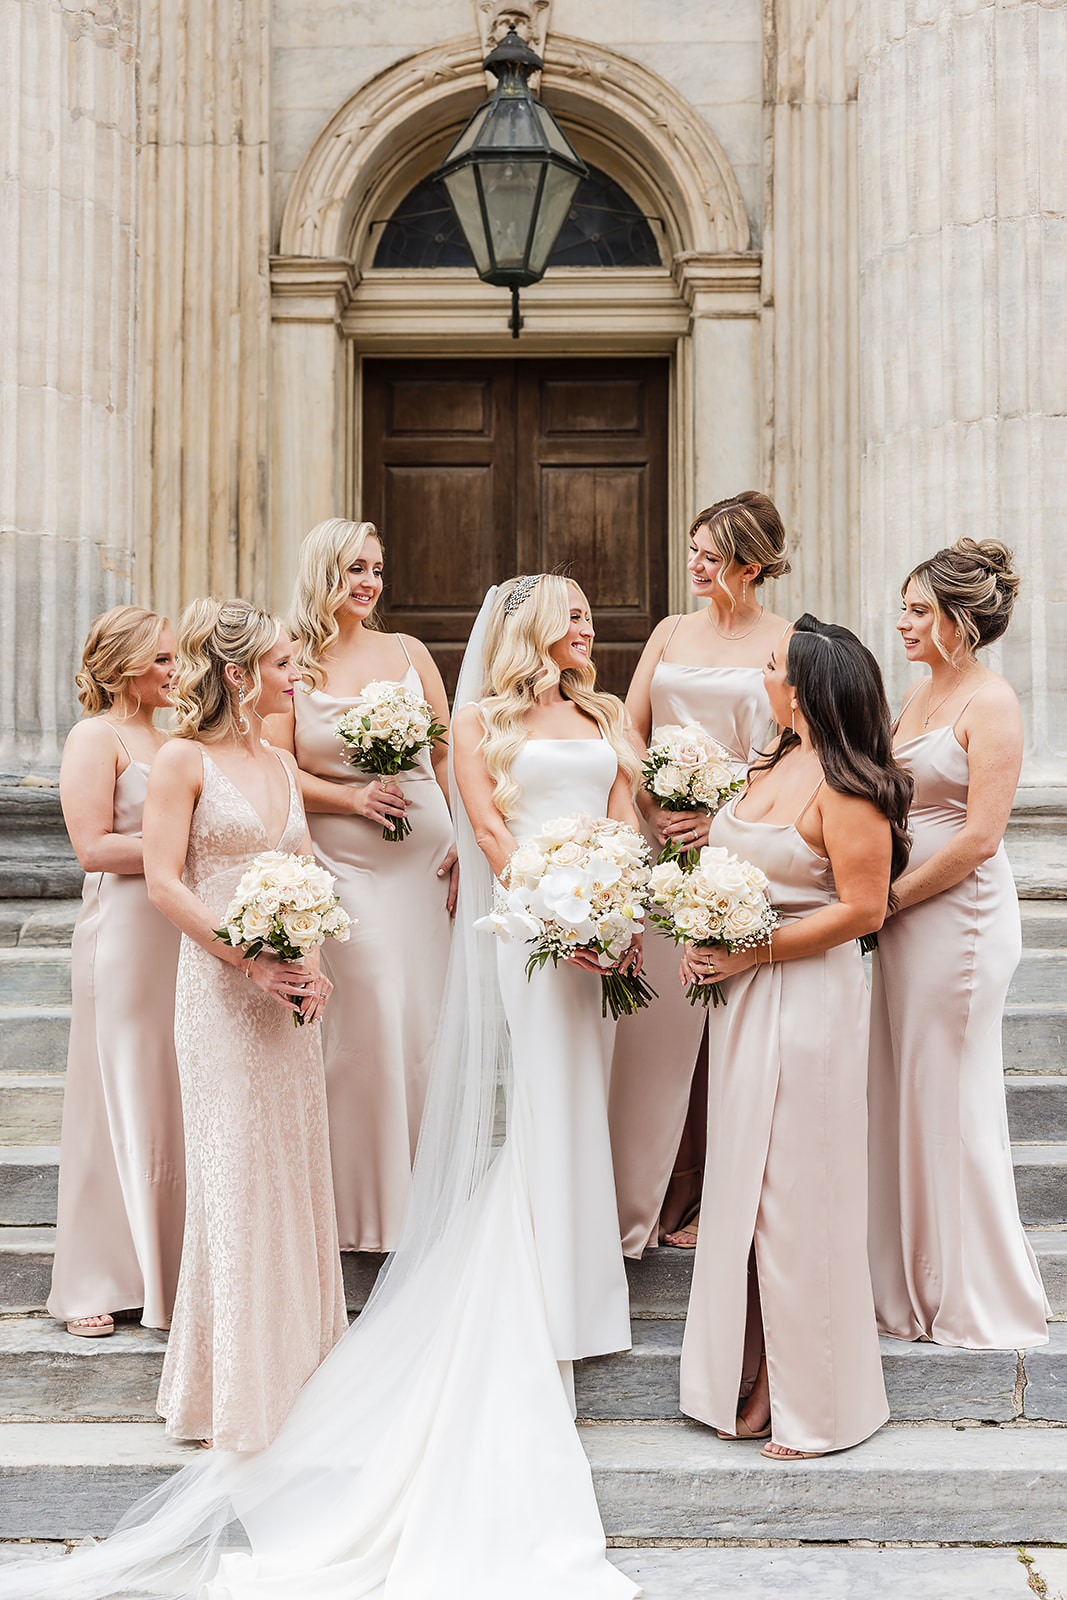 Stunning bridesmaids in blush pink jenny yoo dresses at First National Bank in the Old City Philadelphia